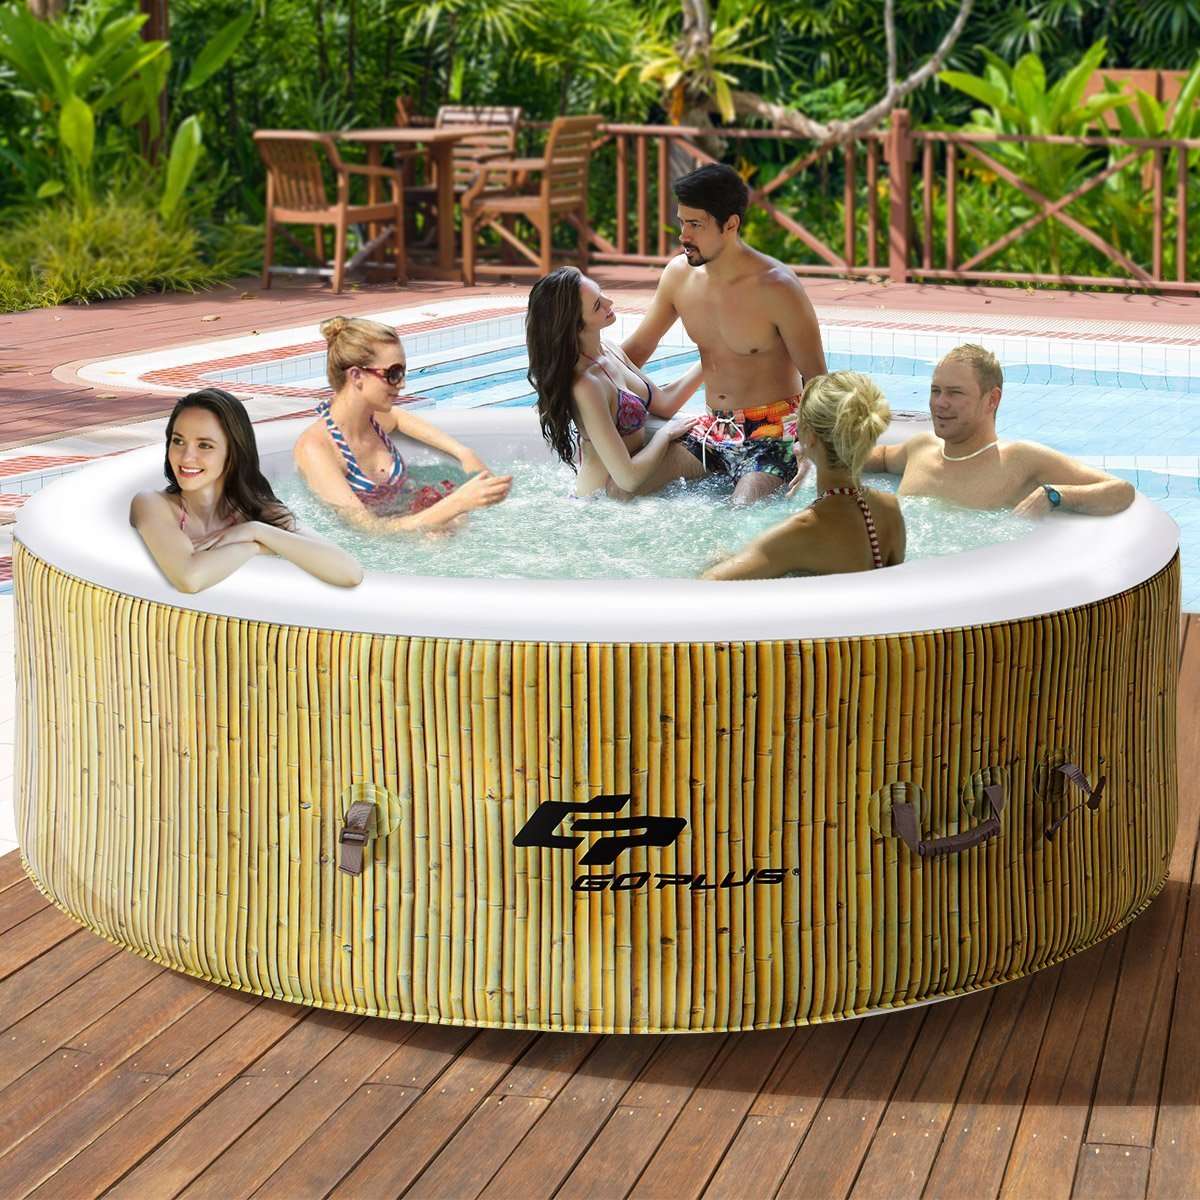 Top 11 Best Inflatable Hot Tubs in 2020 Reviews Healthy